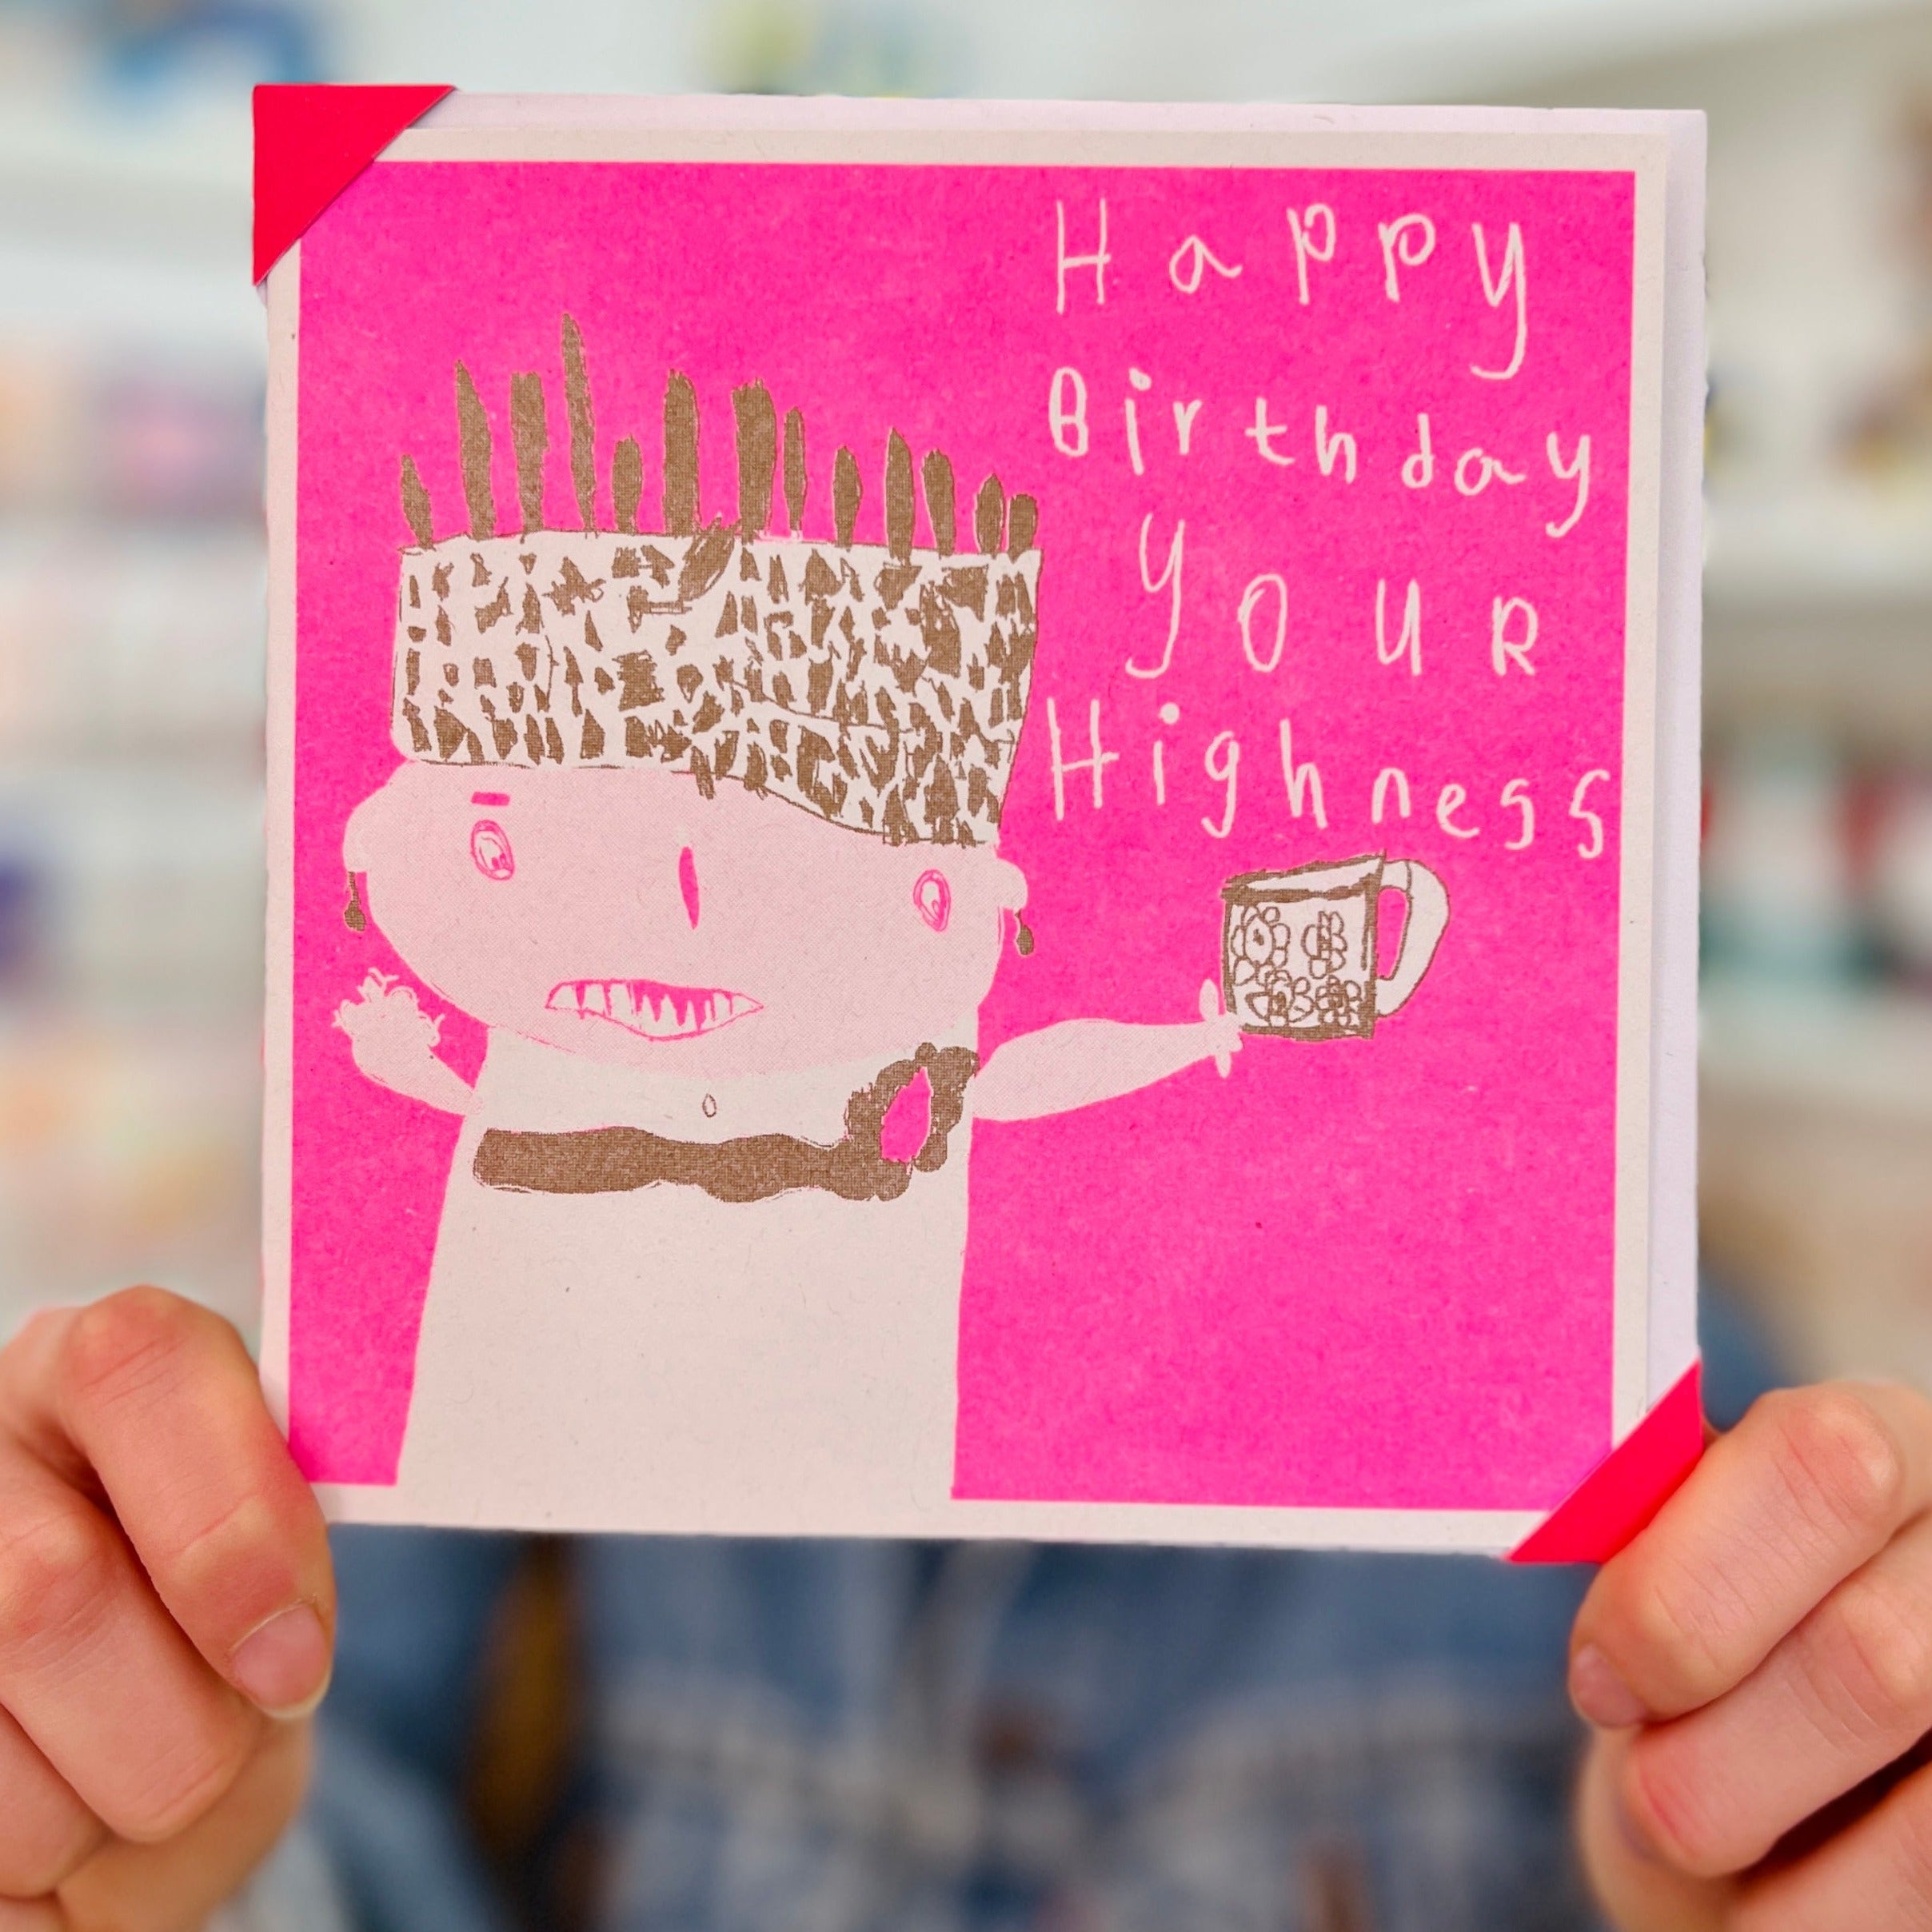 Bright pink and gold card with a hand drawn woman and the words happy birthday your highness